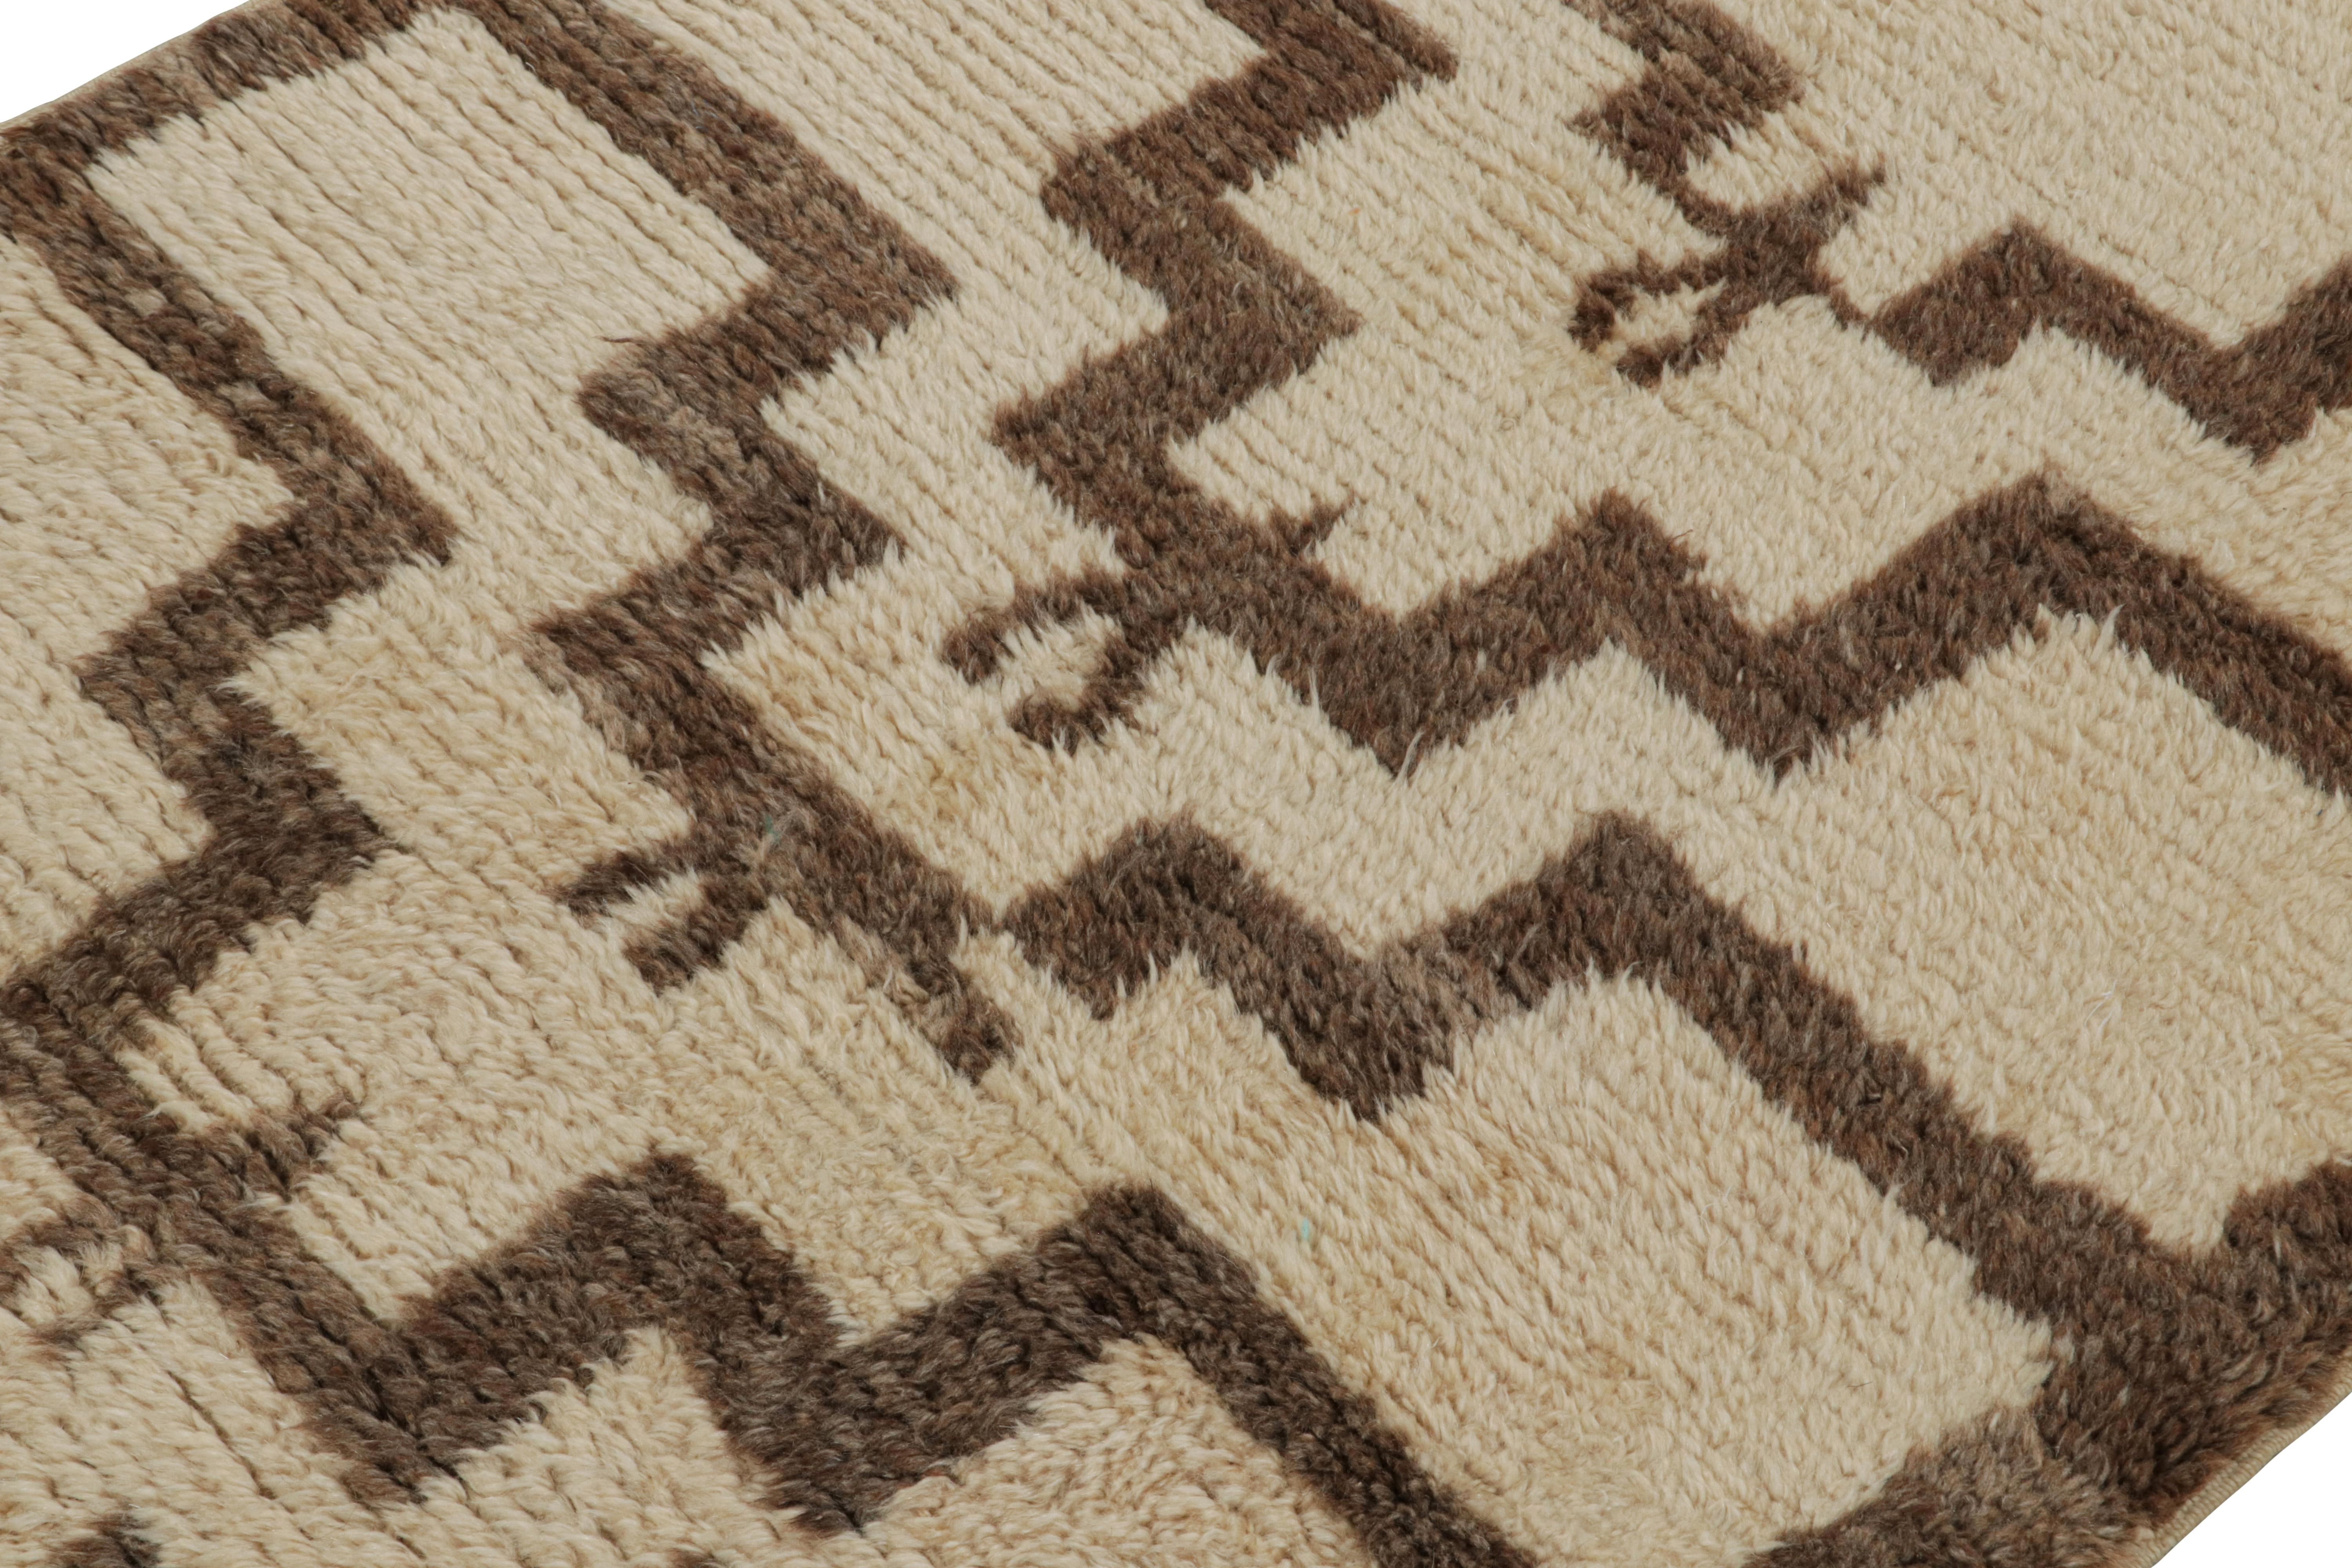 Hand-Knotted Vintage Tulu Rug in Beige, with Brown Geometric Patterns, from Rug & Kilim  For Sale